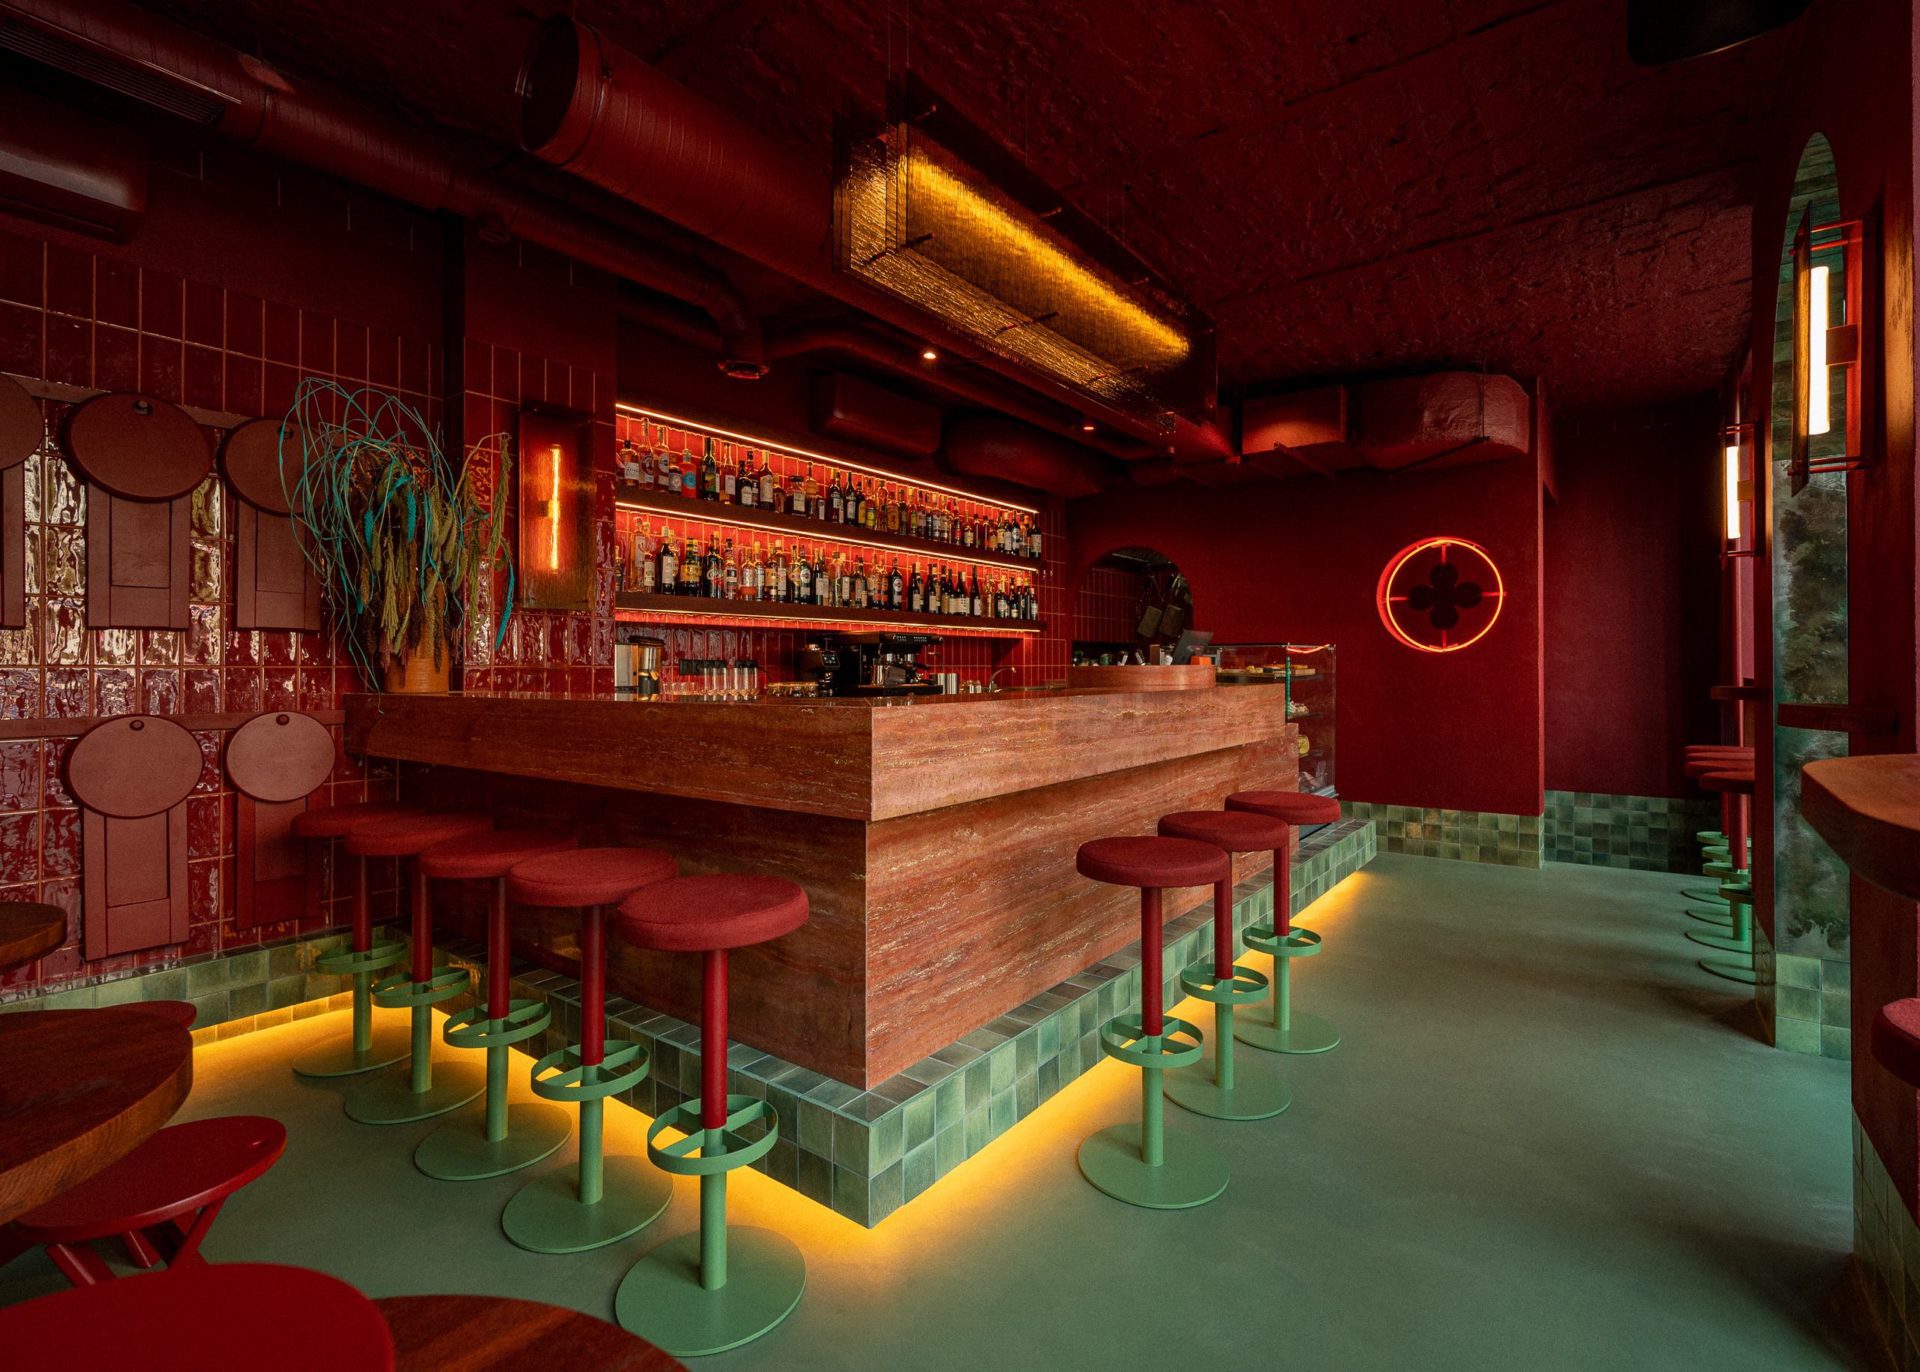 All Right Warsaw: Noke Architects bring the experience of Venice to a bar in Warsaw